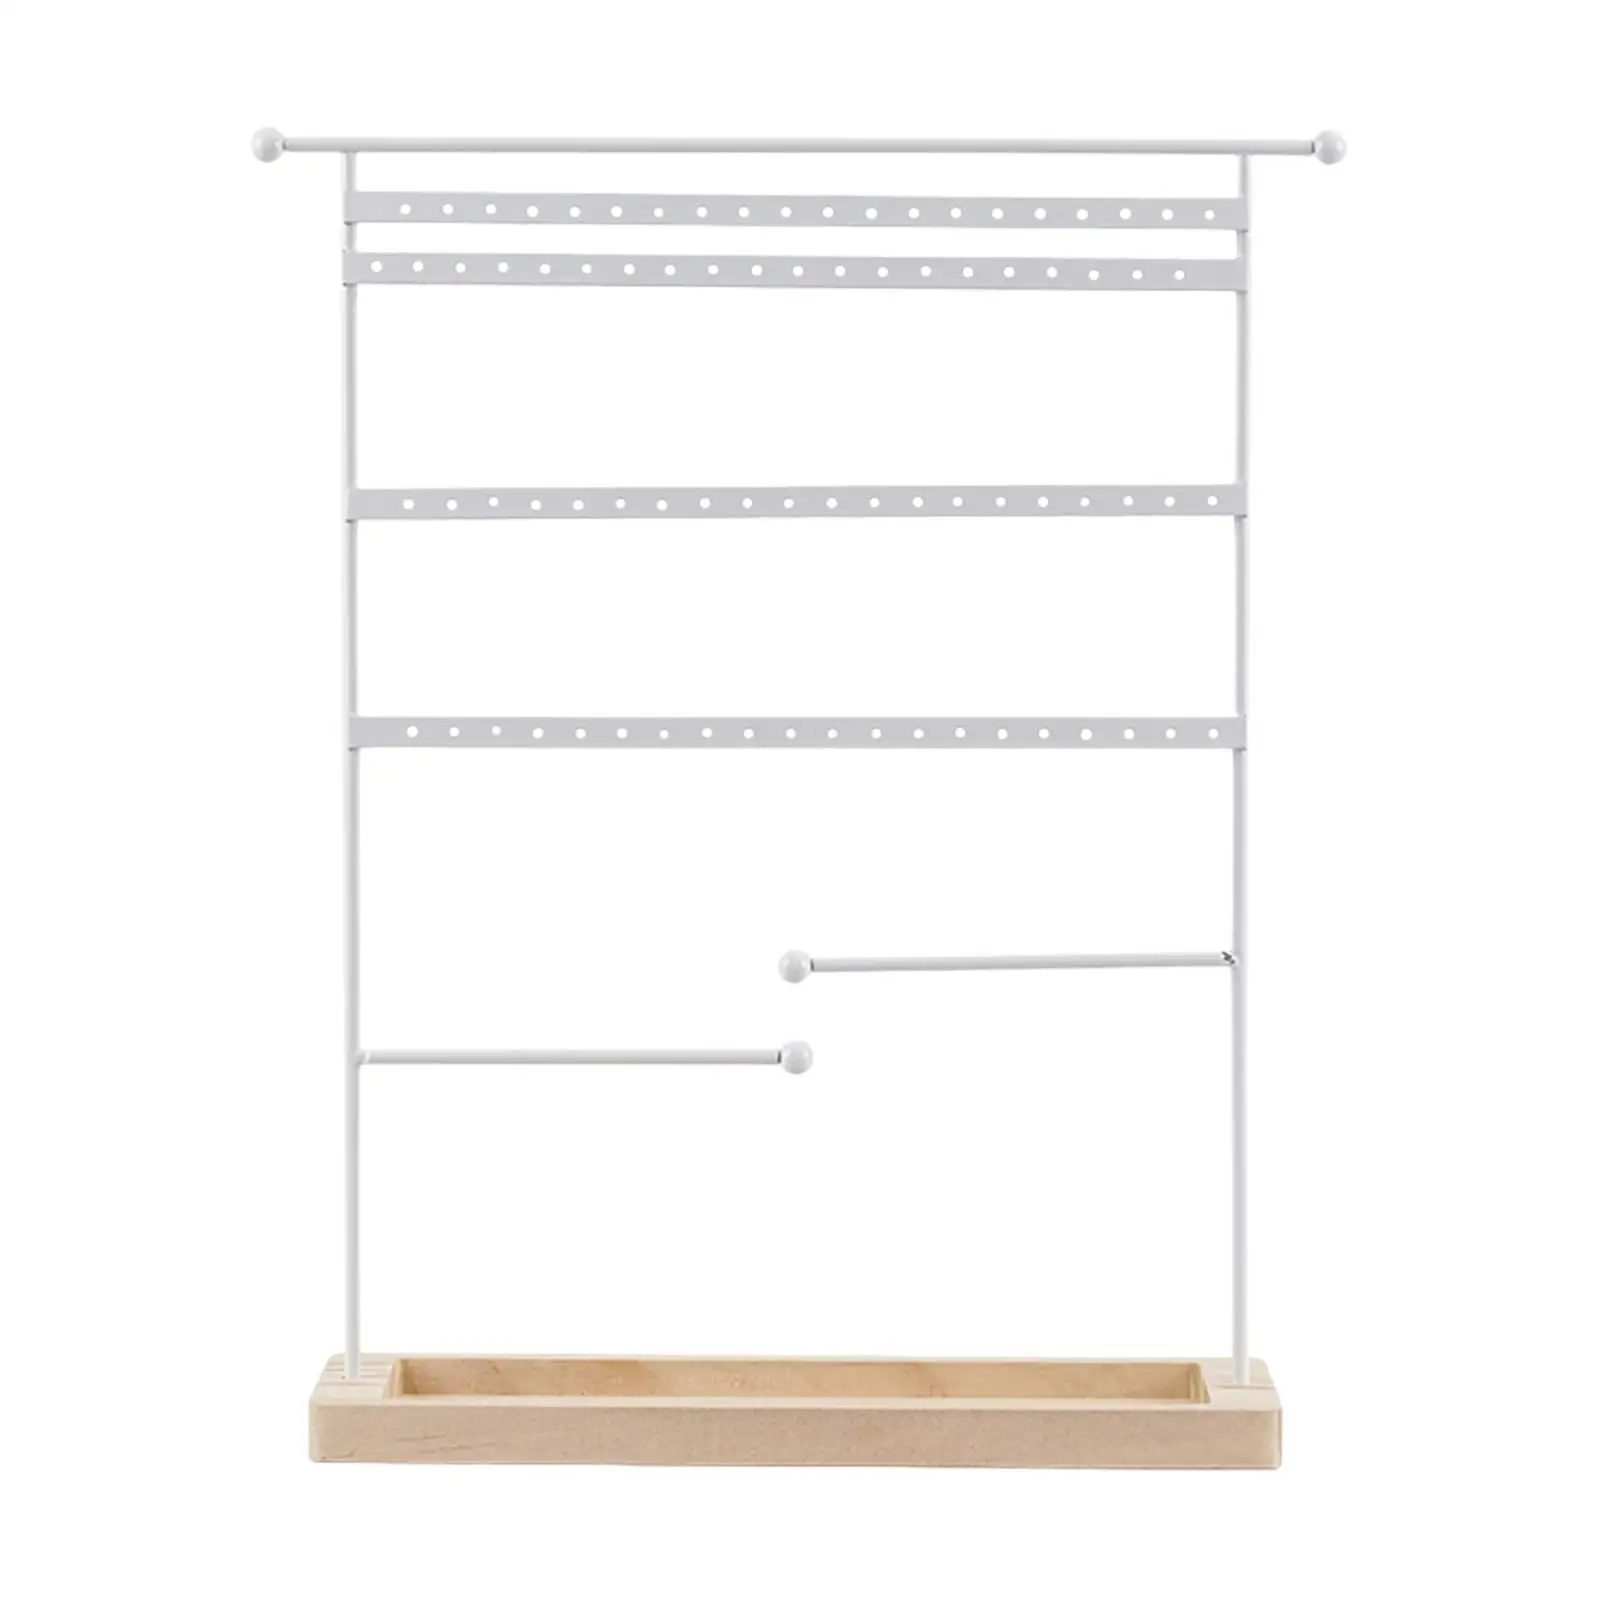 Jewelry Display Organizer Multi Layers Earring Display Holder Necklace Holder Stand for Bedroom Home Closet Desktop Eardrop